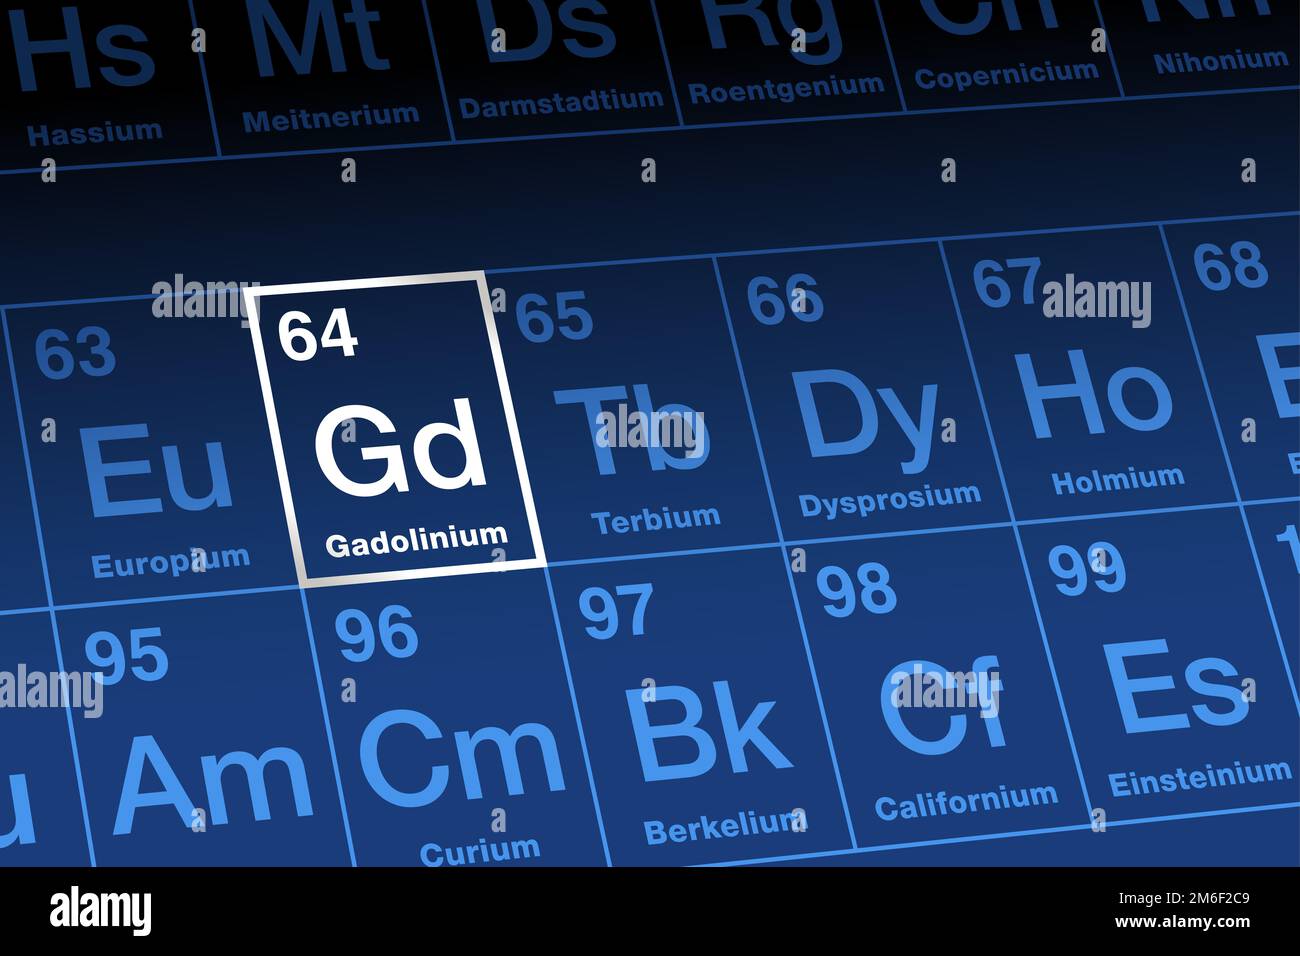 Gadolinium, on periodic table. Ductile, ferromagnetic rare earth metal in the lanthanide series, with a variety of specialized uses. Atomic number 64. Stock Photo